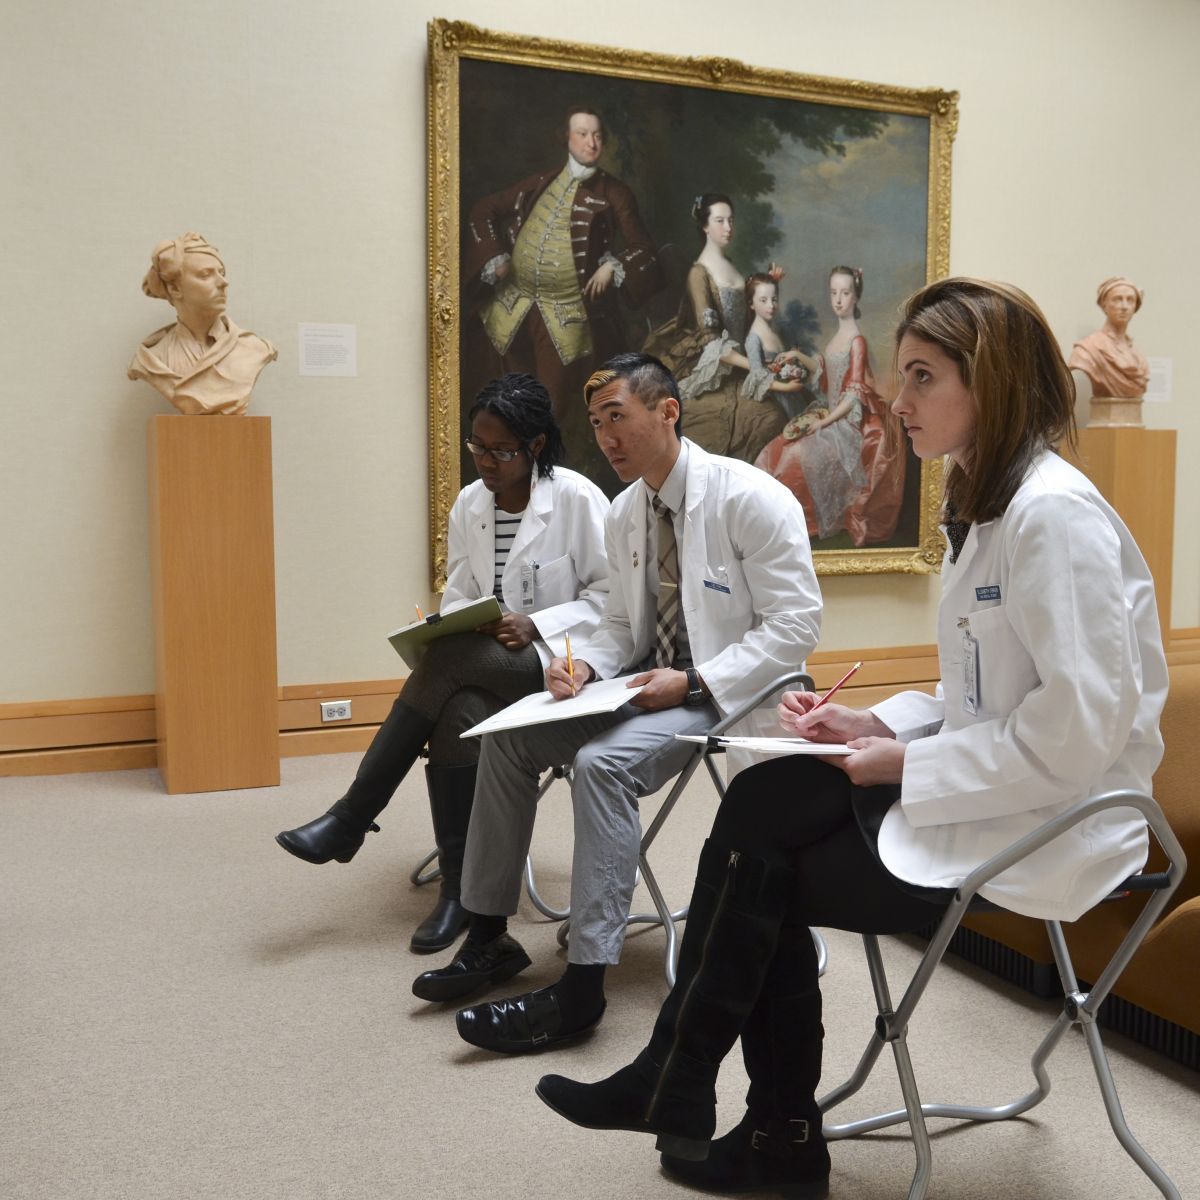 Three students drawing in a gallery